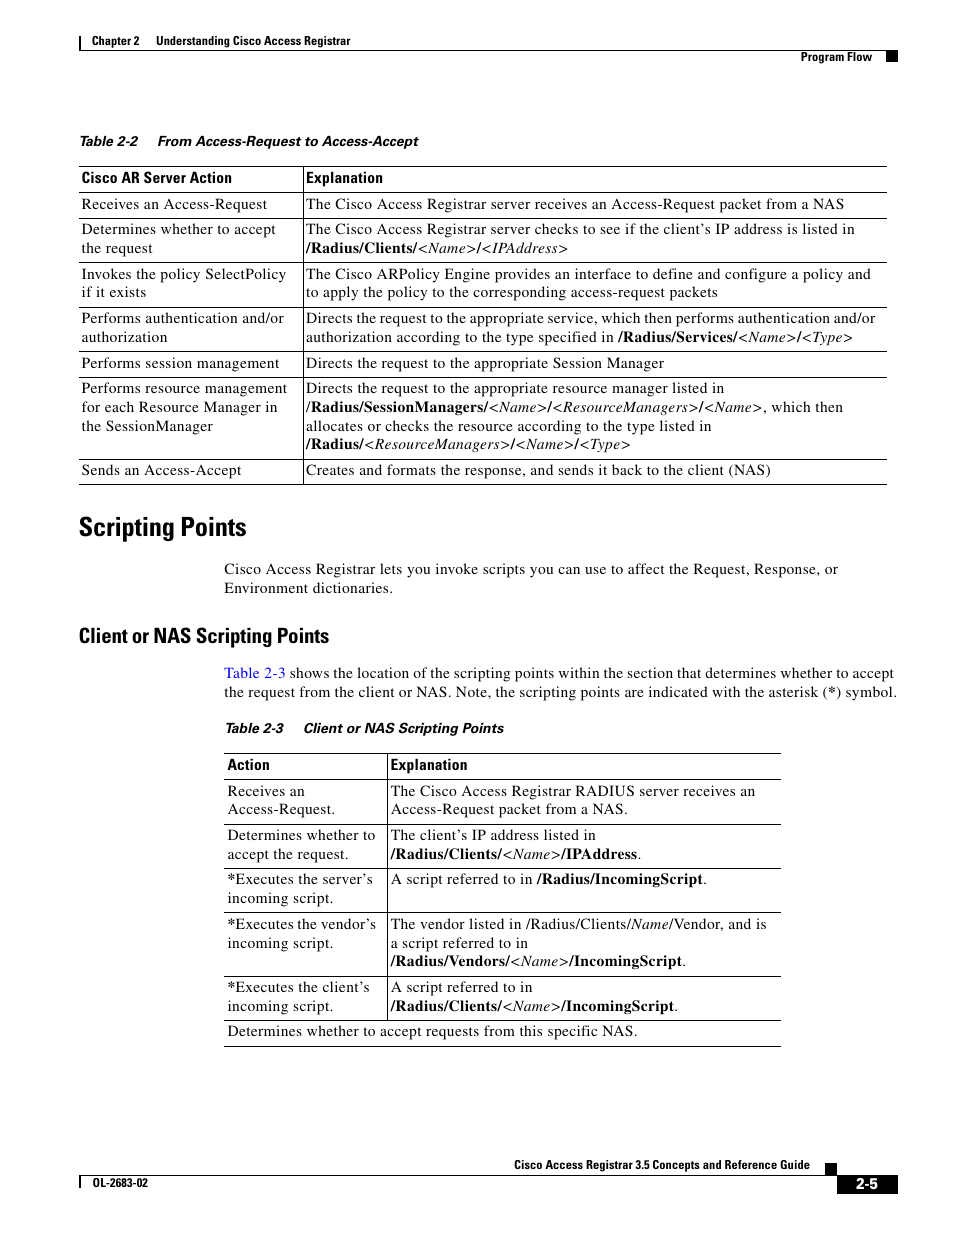 Scripting points, Client or nas scripting points, Table 2-2 | Cisco Cisco Access Registrar 3.5 User Manual | Page 23 / 80